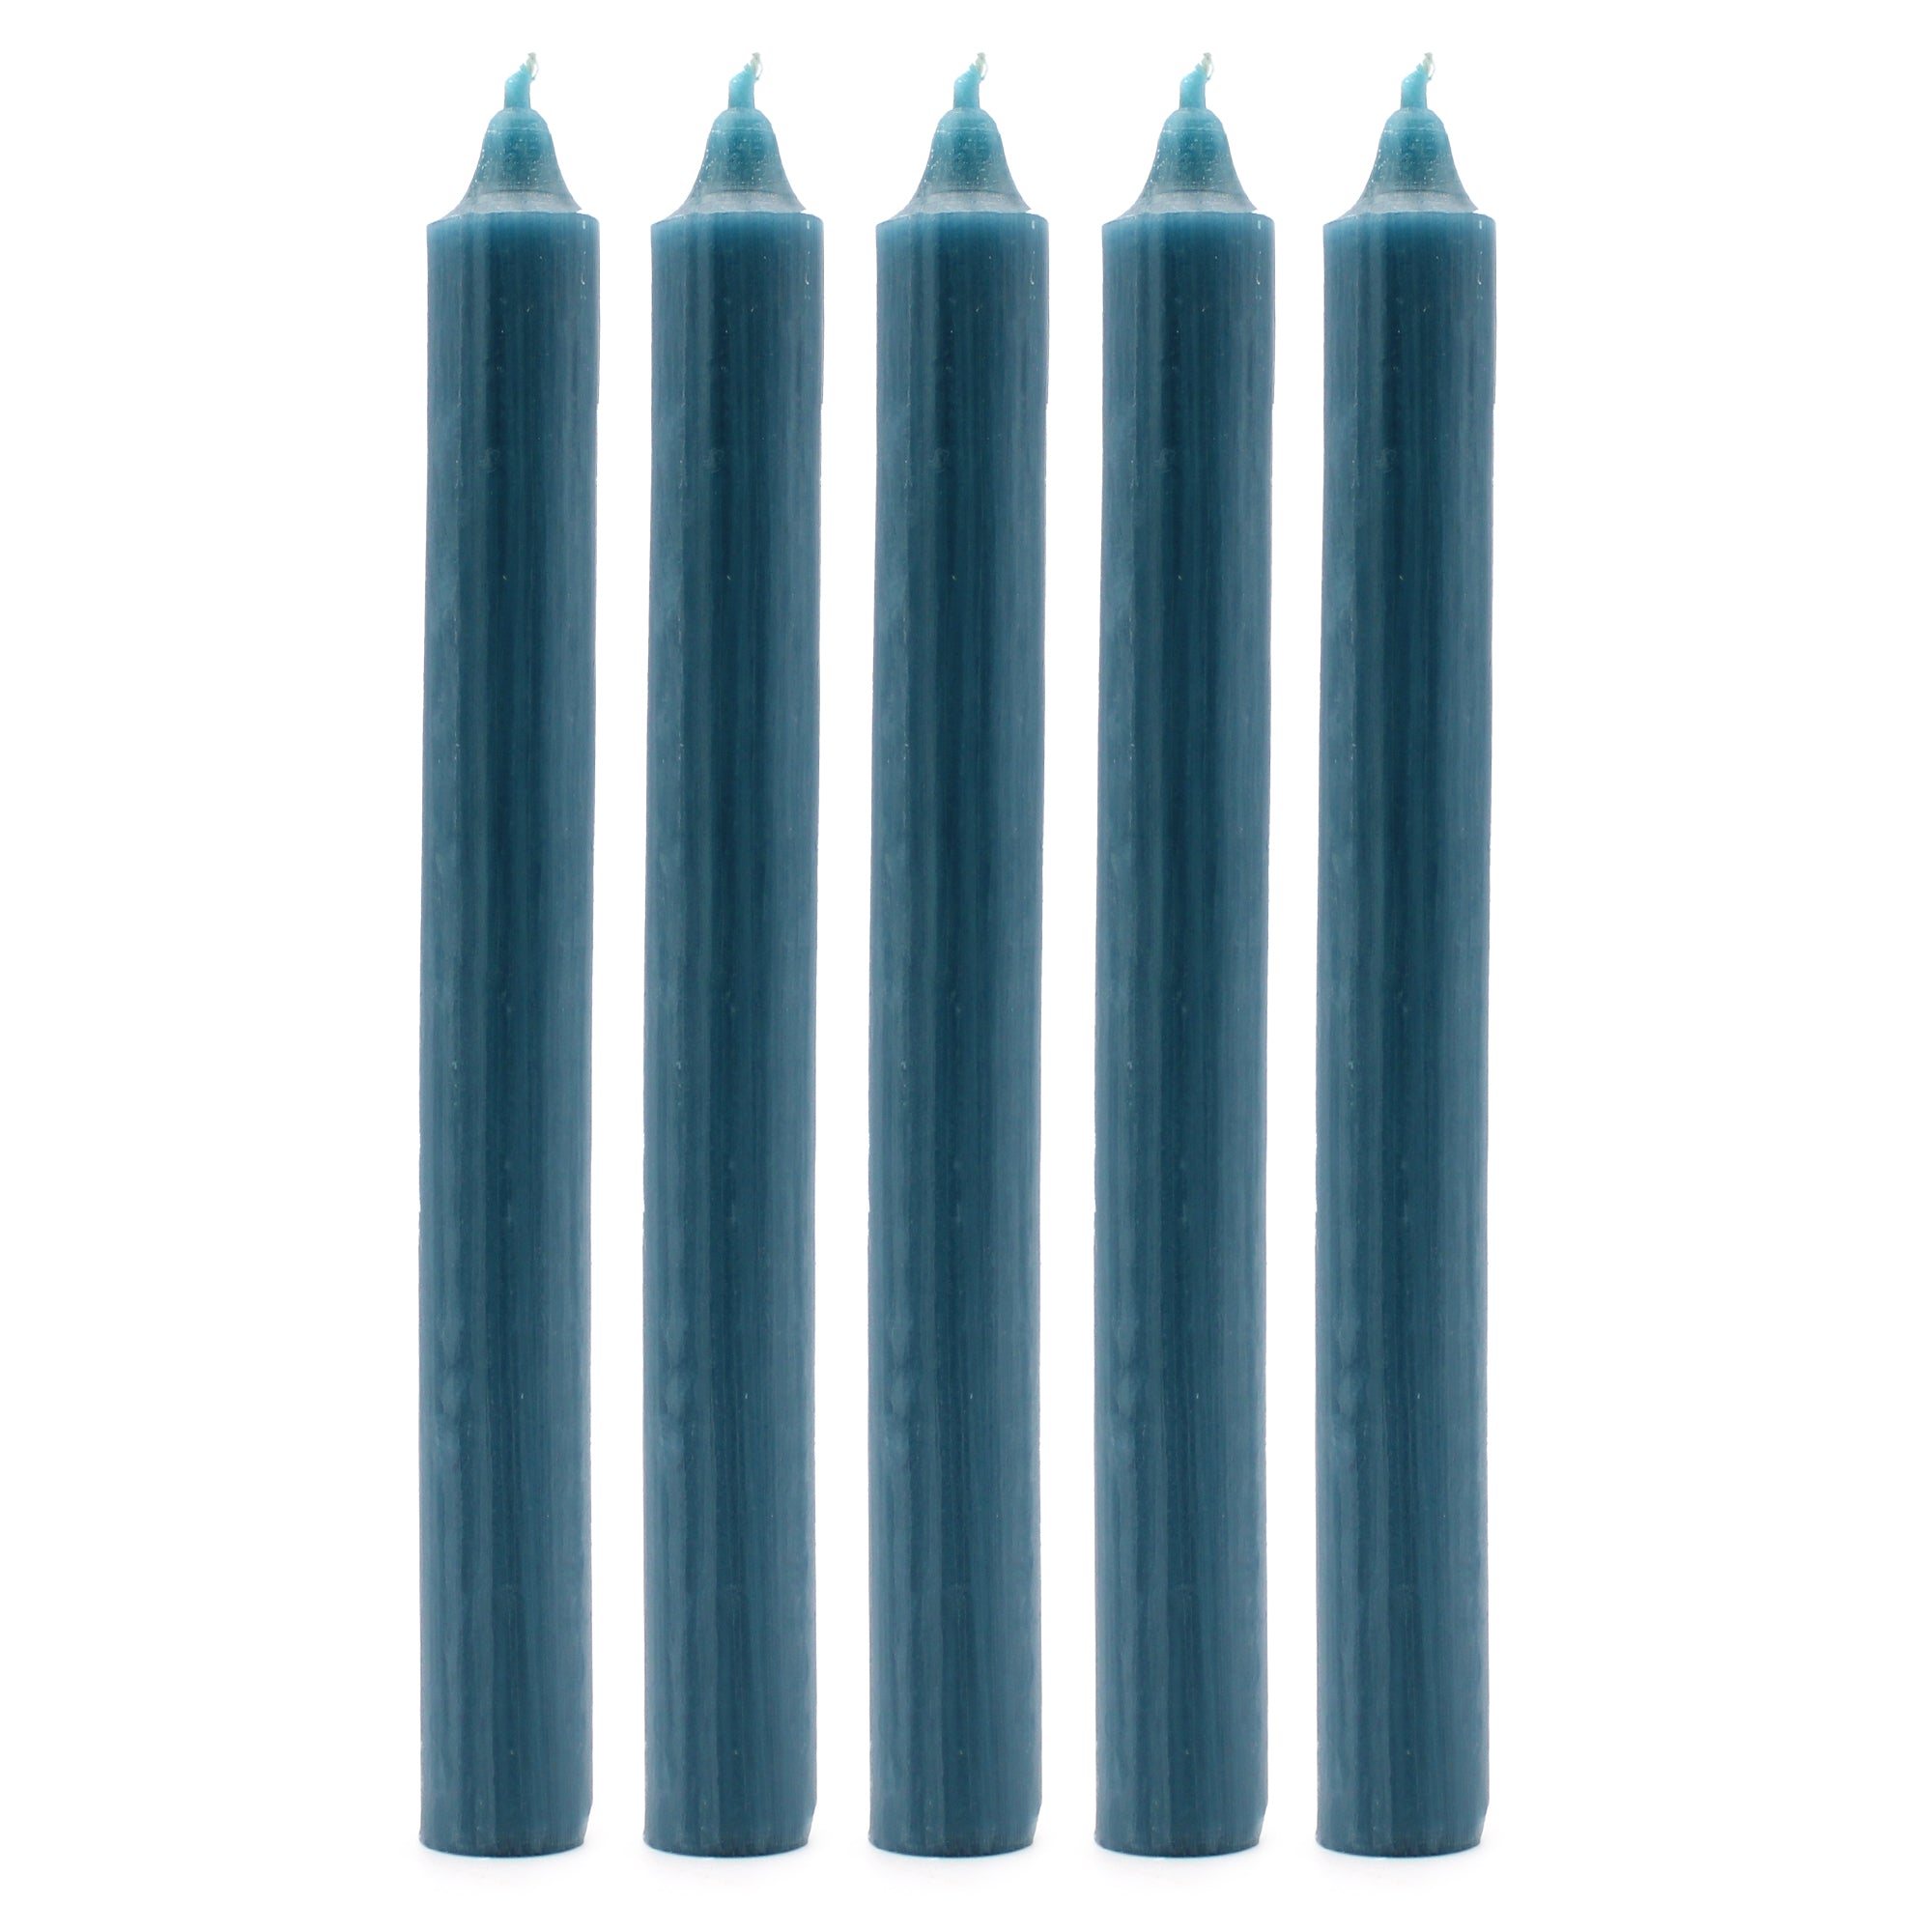 View Solid Colour Dinner Candles Rustic Teal Pack of 5 information